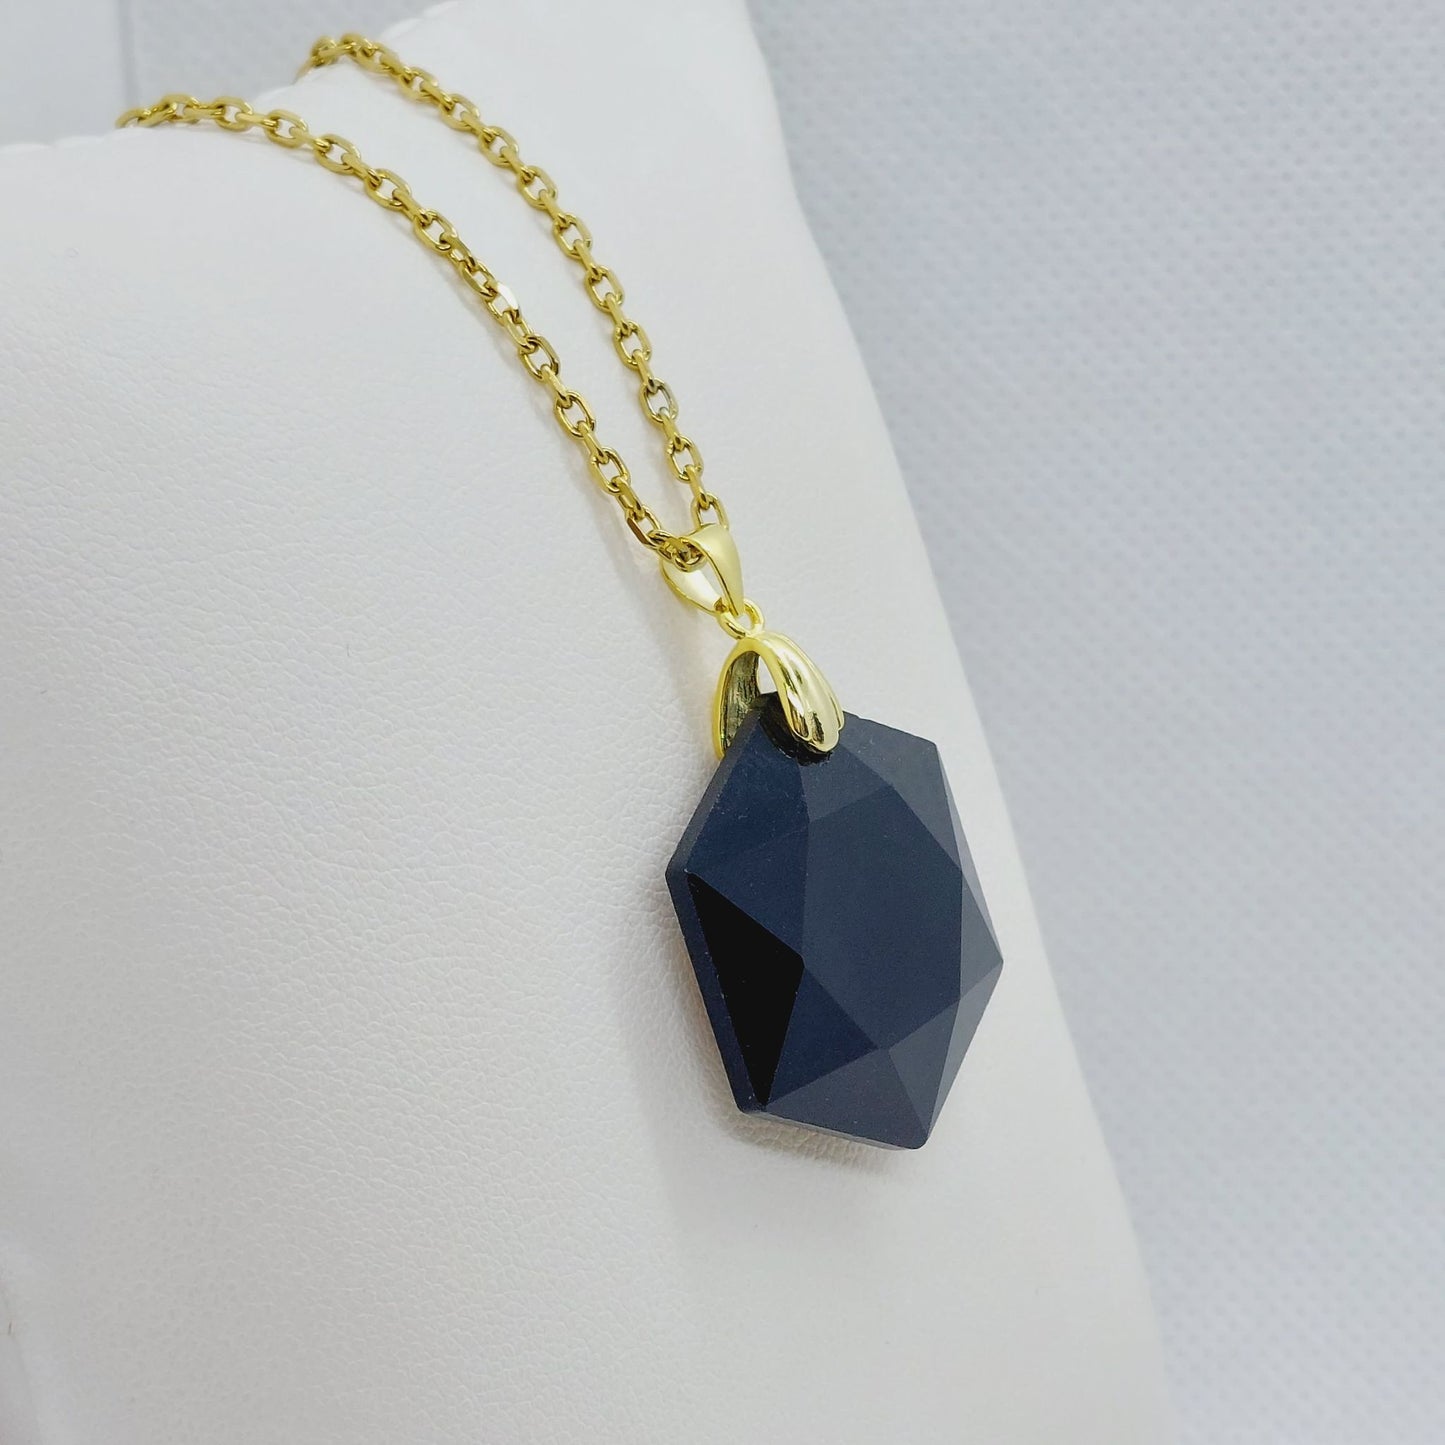 Natural Hexagon Obsidian Stone Pendant - Stainless Steel Chain Gold Plated